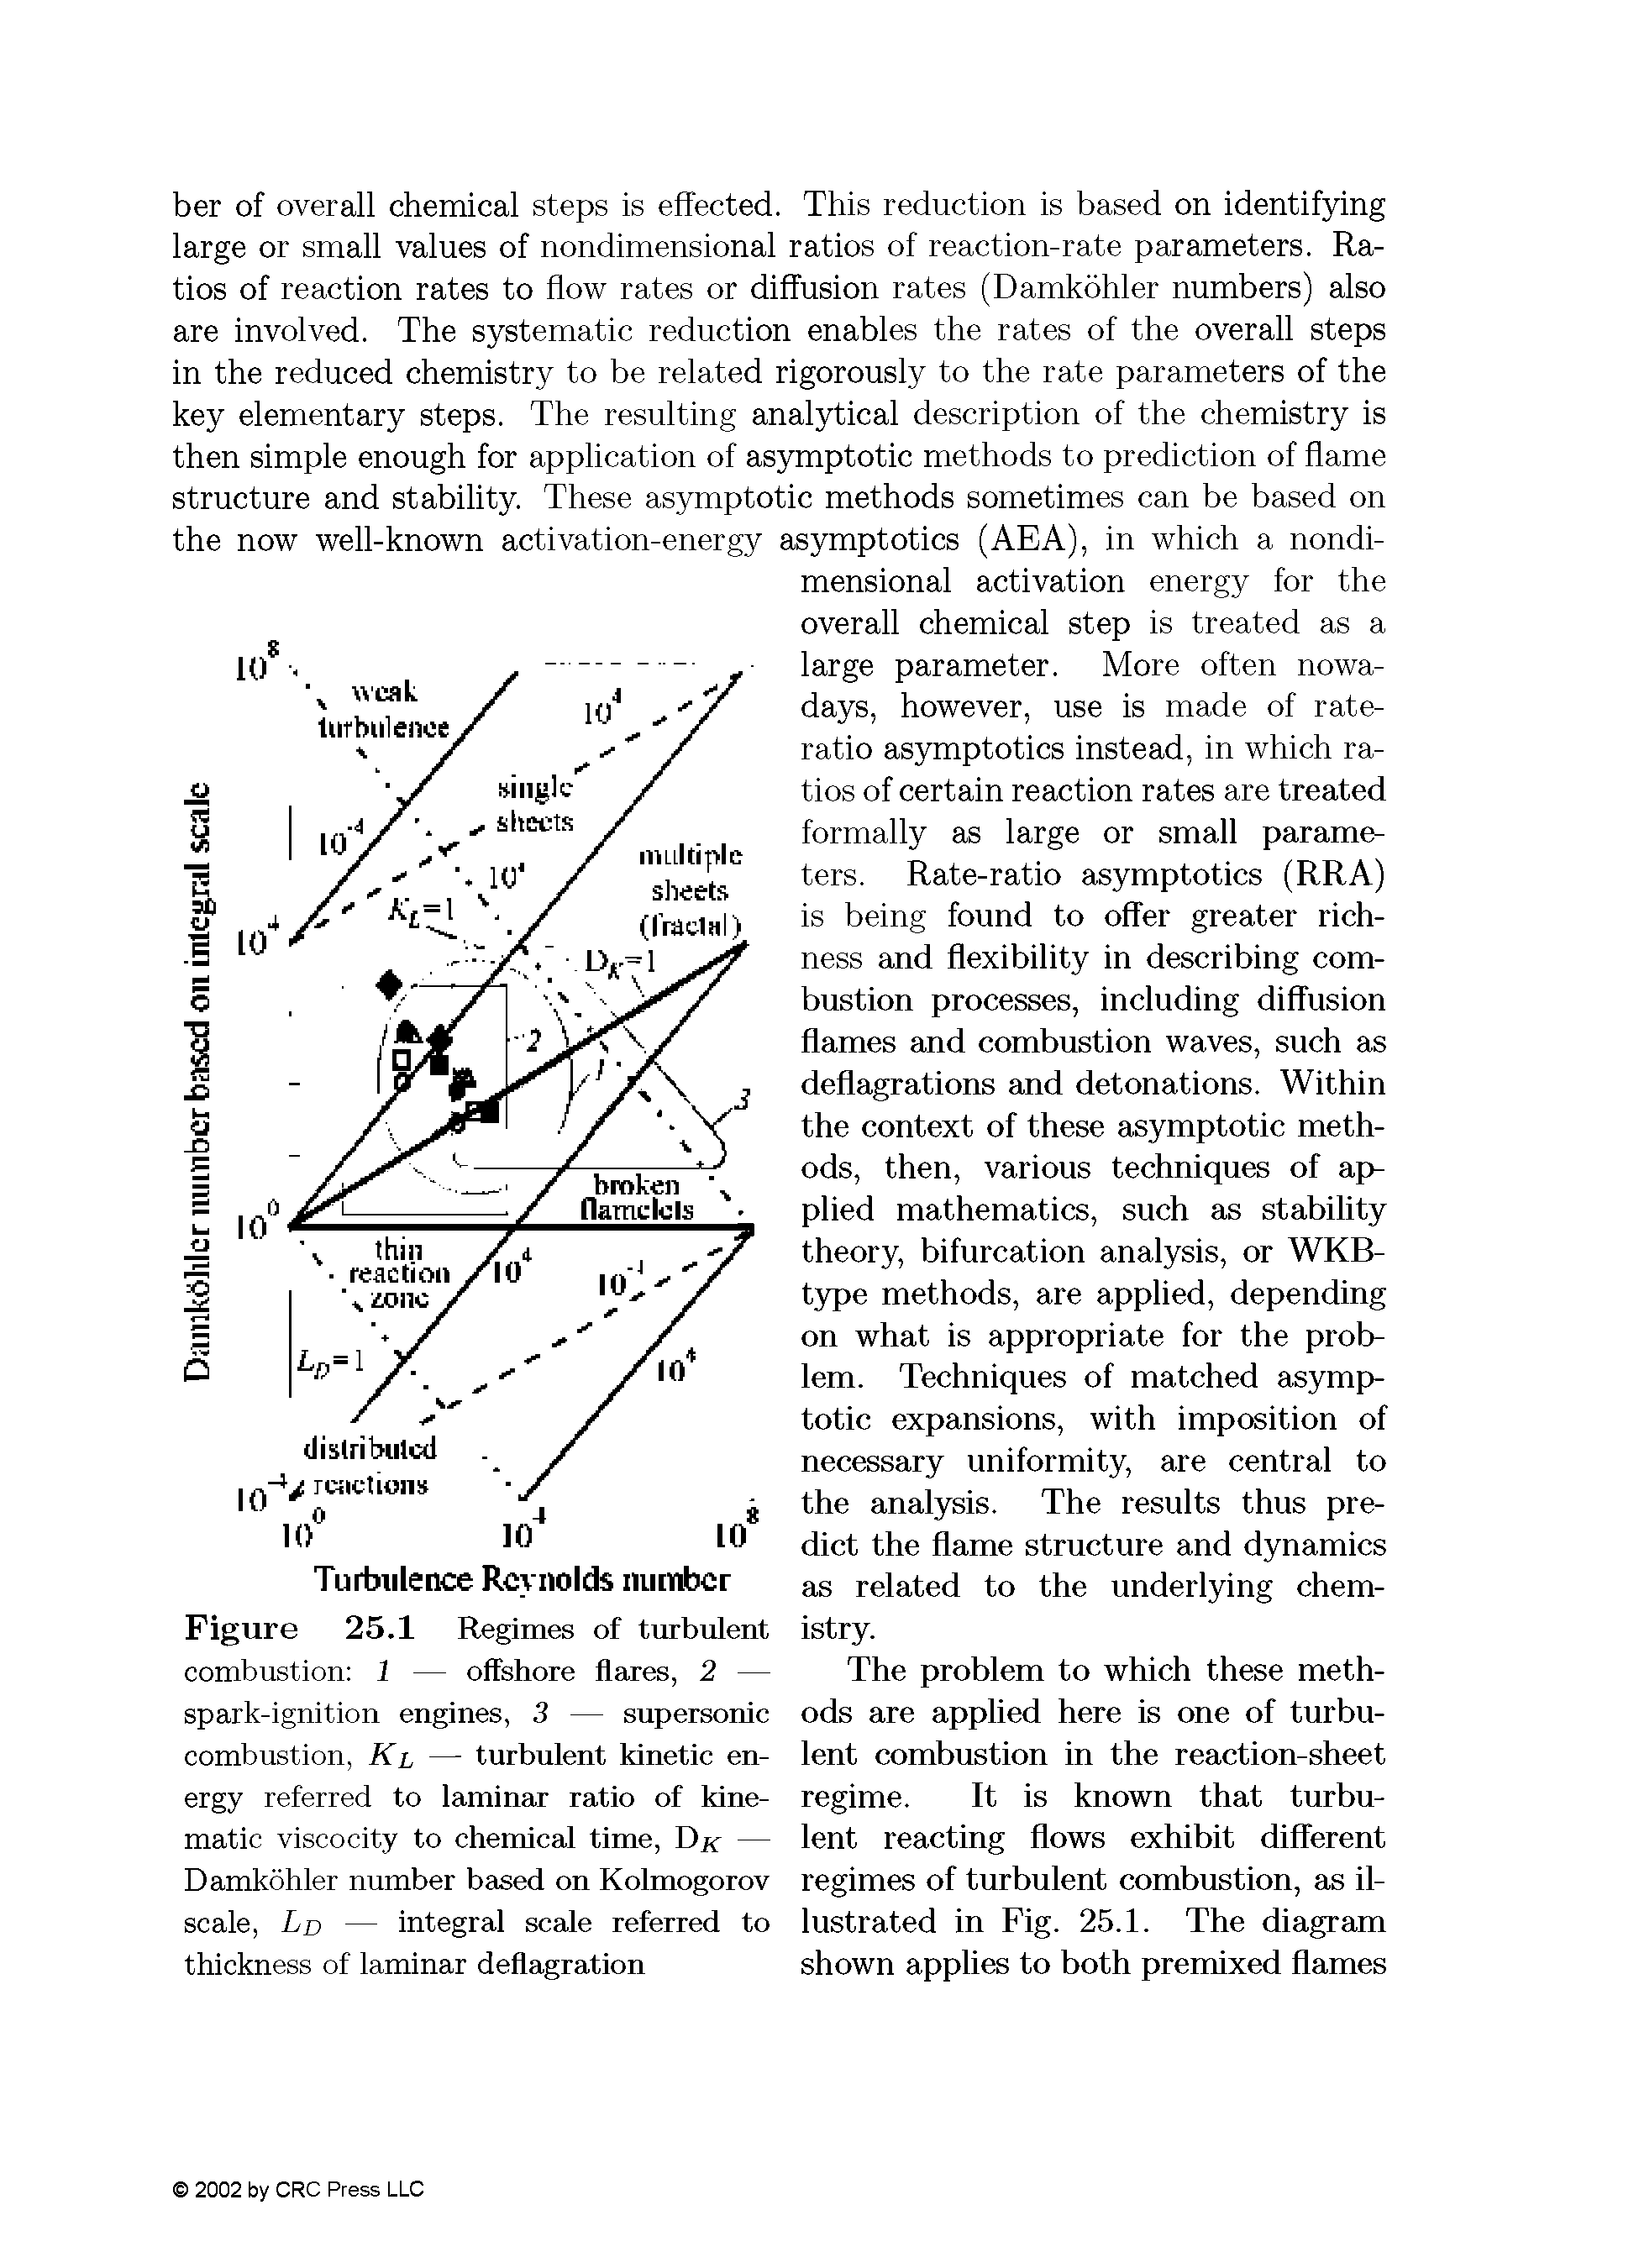 Figure 25.1 Regimes of turbulent combustion 1 — offshore flares, 2 — spark-ignition engines, 3 — supersonic combustion, Kl — turbulent kinetic energy referred to laminar ratio of kinematic viscocity to chemical time, — Damkohler number based on Kolmogorov scale, Ld — integral scale referred to thickness of laminar deflagration...